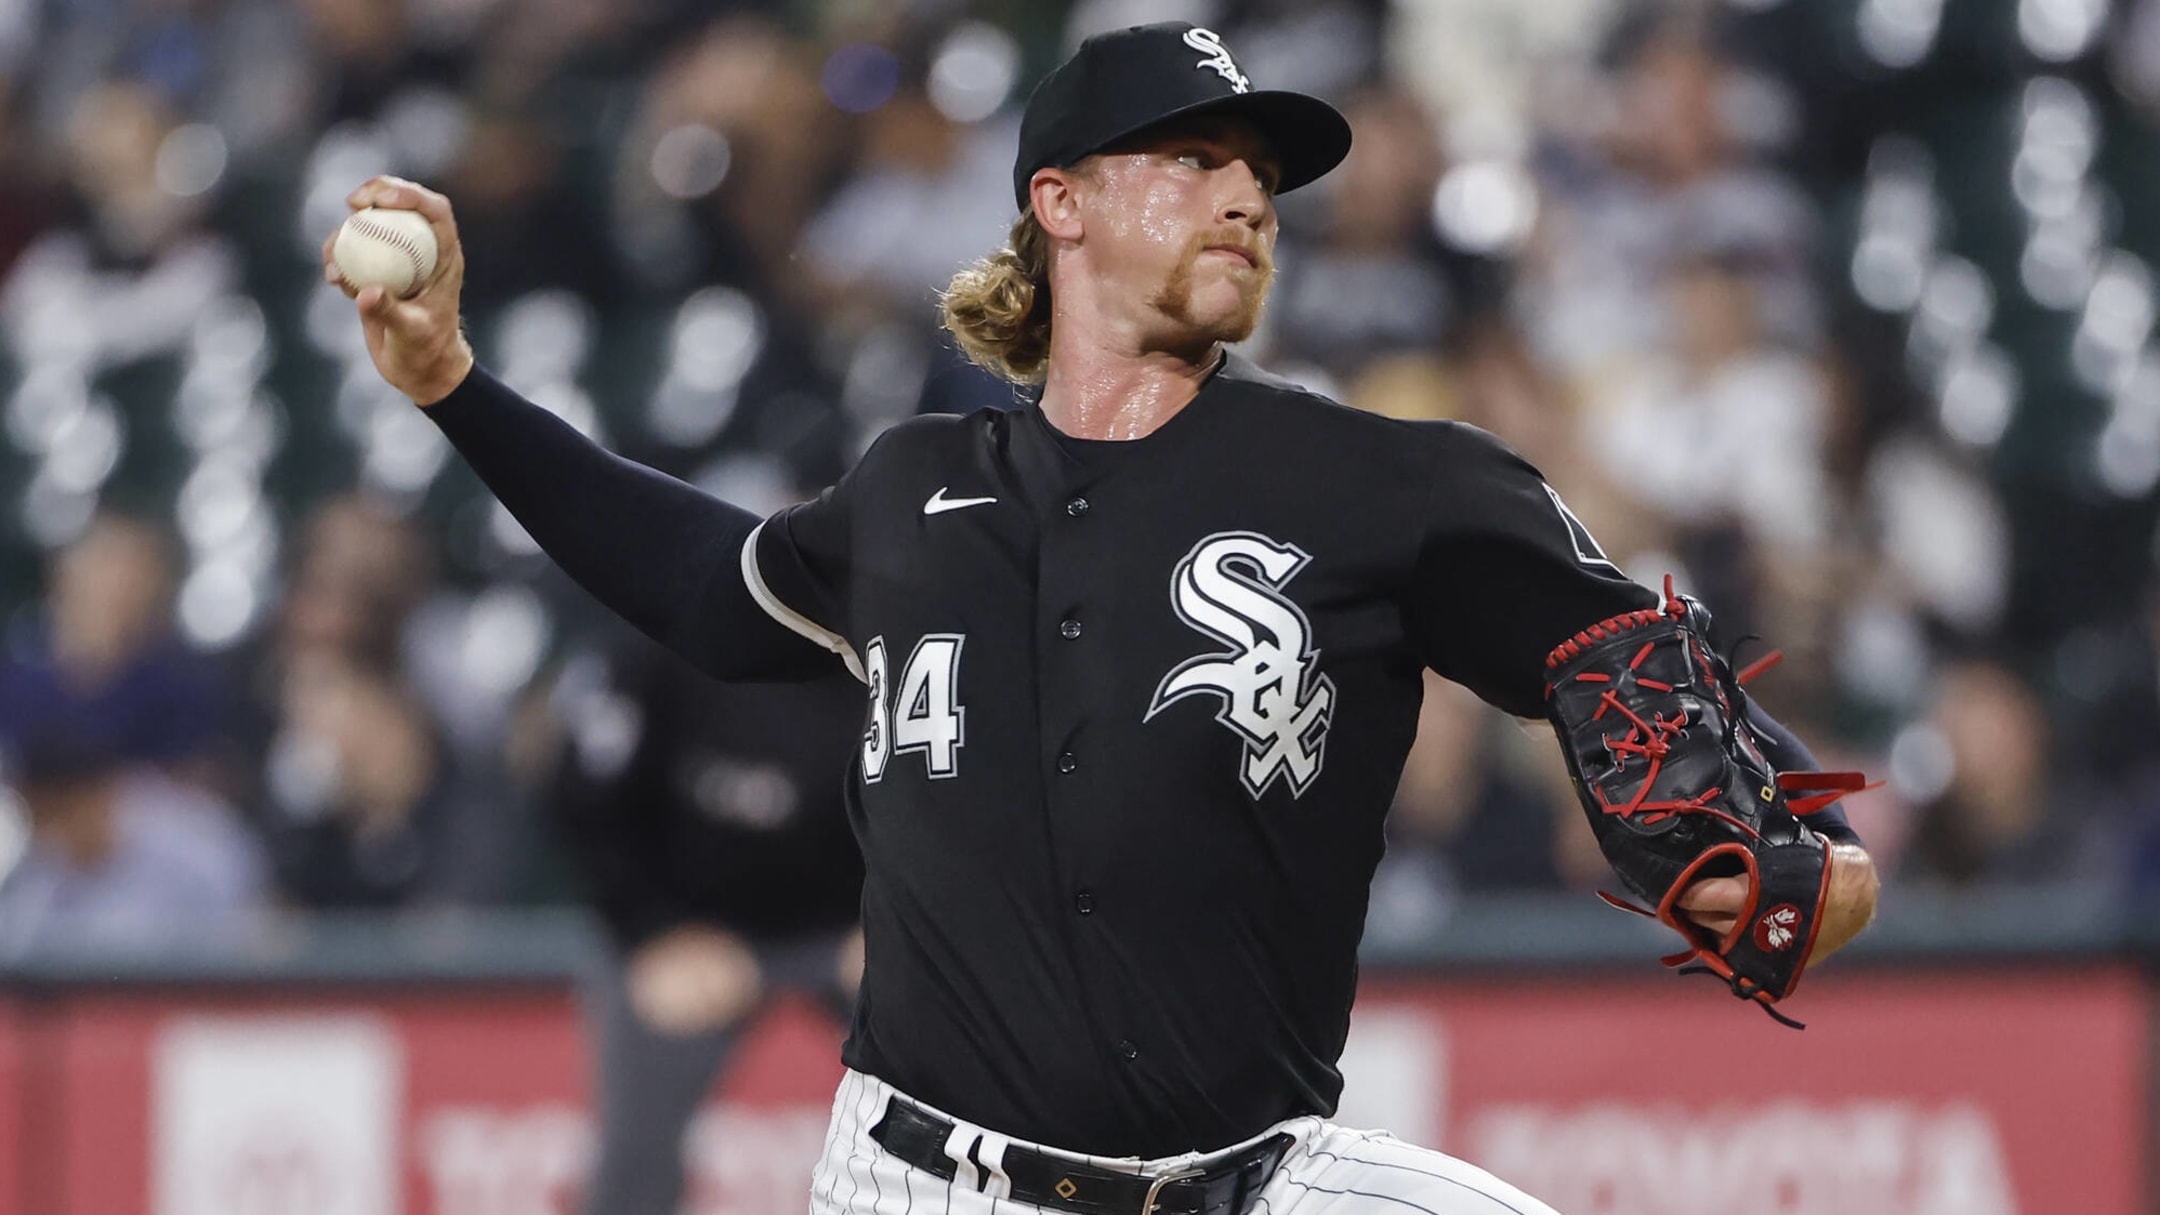 Michael Kopech lands on IL with shoulder inflammation